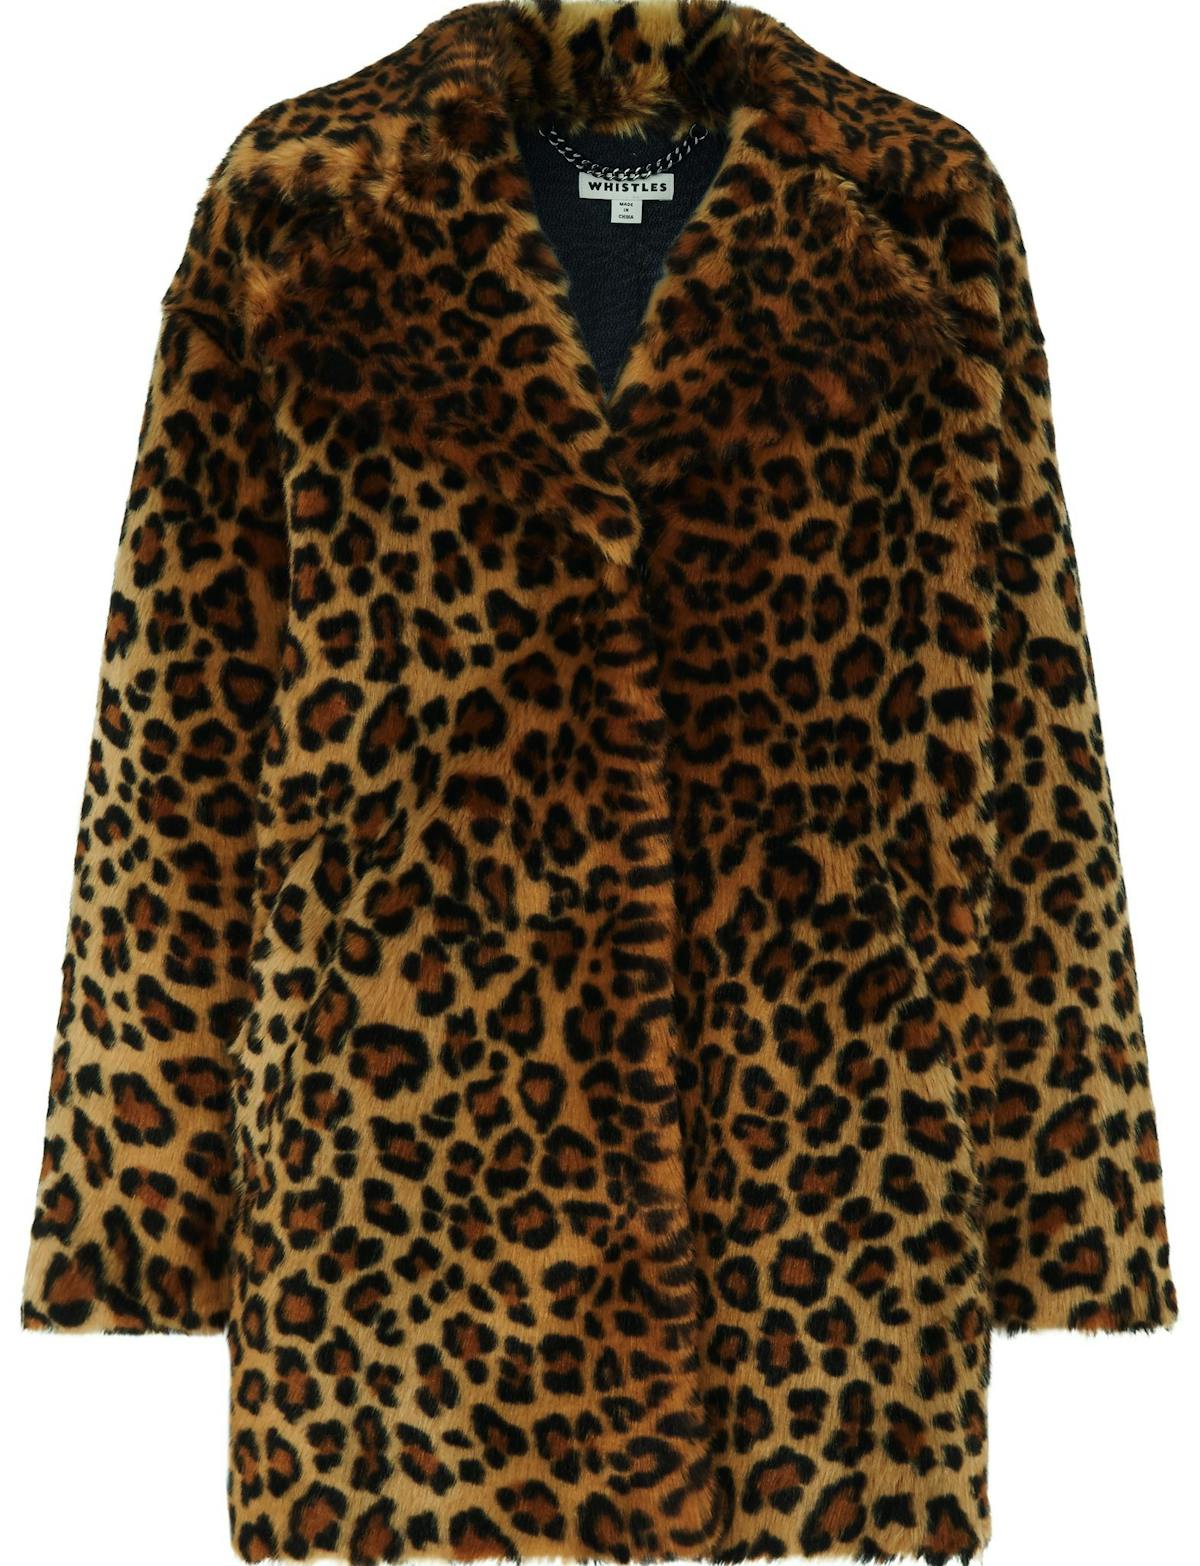 6 leopard print coats that will stand out from the crowd